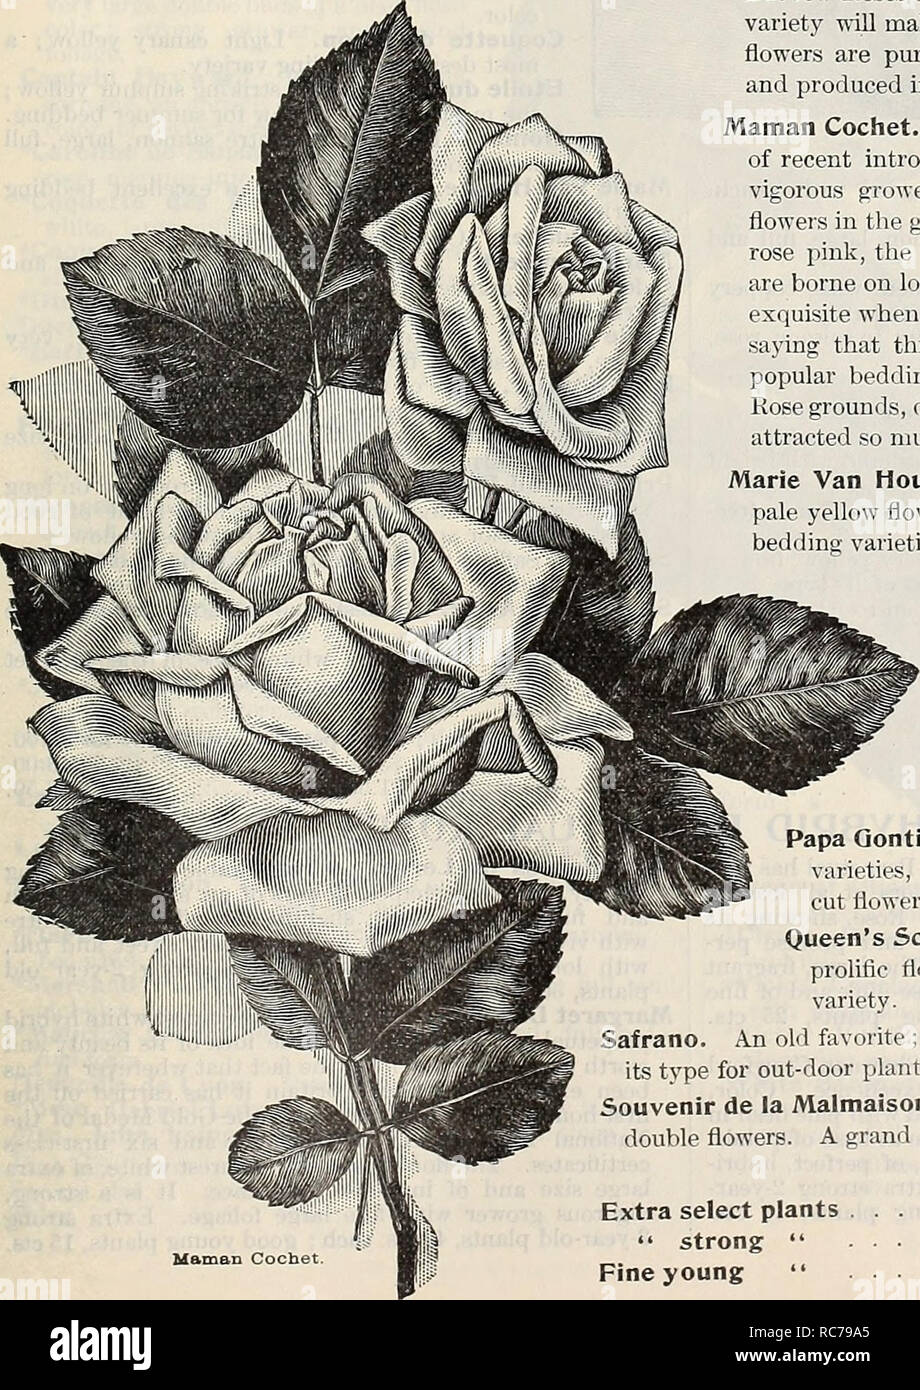 . Dreer's garden calendar : 1897. Seeds Catalogs; Nursery stock Catalogs; Gardening Equipment and supplies Catalogs; Flowers Seeds Catalogs; Vegetables Seeds Catalogs; Fruit Seeds Catalogs. Vase of Roses.. Maman Cochet Hermosa. Undoubtedly the best pink bedding Rose in cultivation ; an old favorite. La Neige. A comparatively new Bengal or Daily Rose. But few Roses of this class are offered, and this lovely variety will make a welcome addition to our list. The flowers are pure white, of medium size, very double, and produced in the greatest profusion. Maman Cochet. Undoubtedly the finest beddin Stock Photo